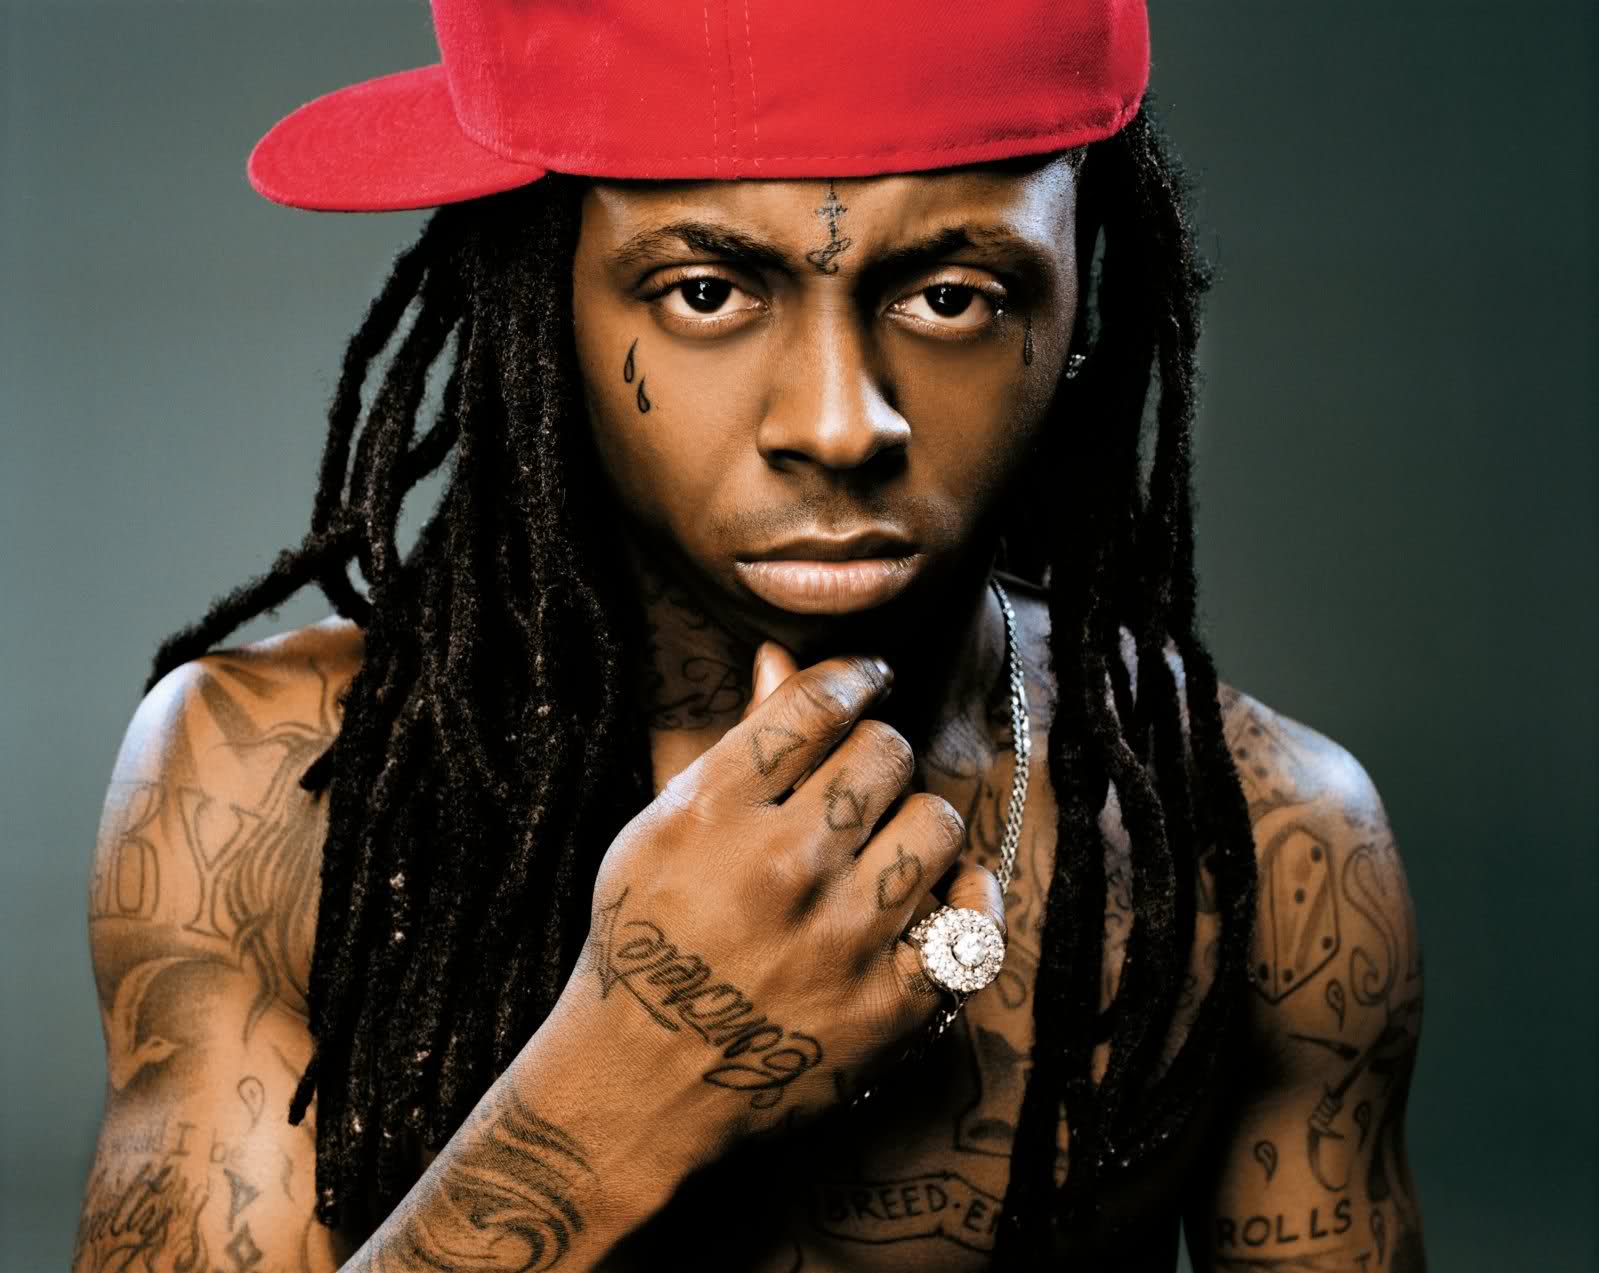 Official Post Rare Picture of Lil Wayne Thread [Archive]